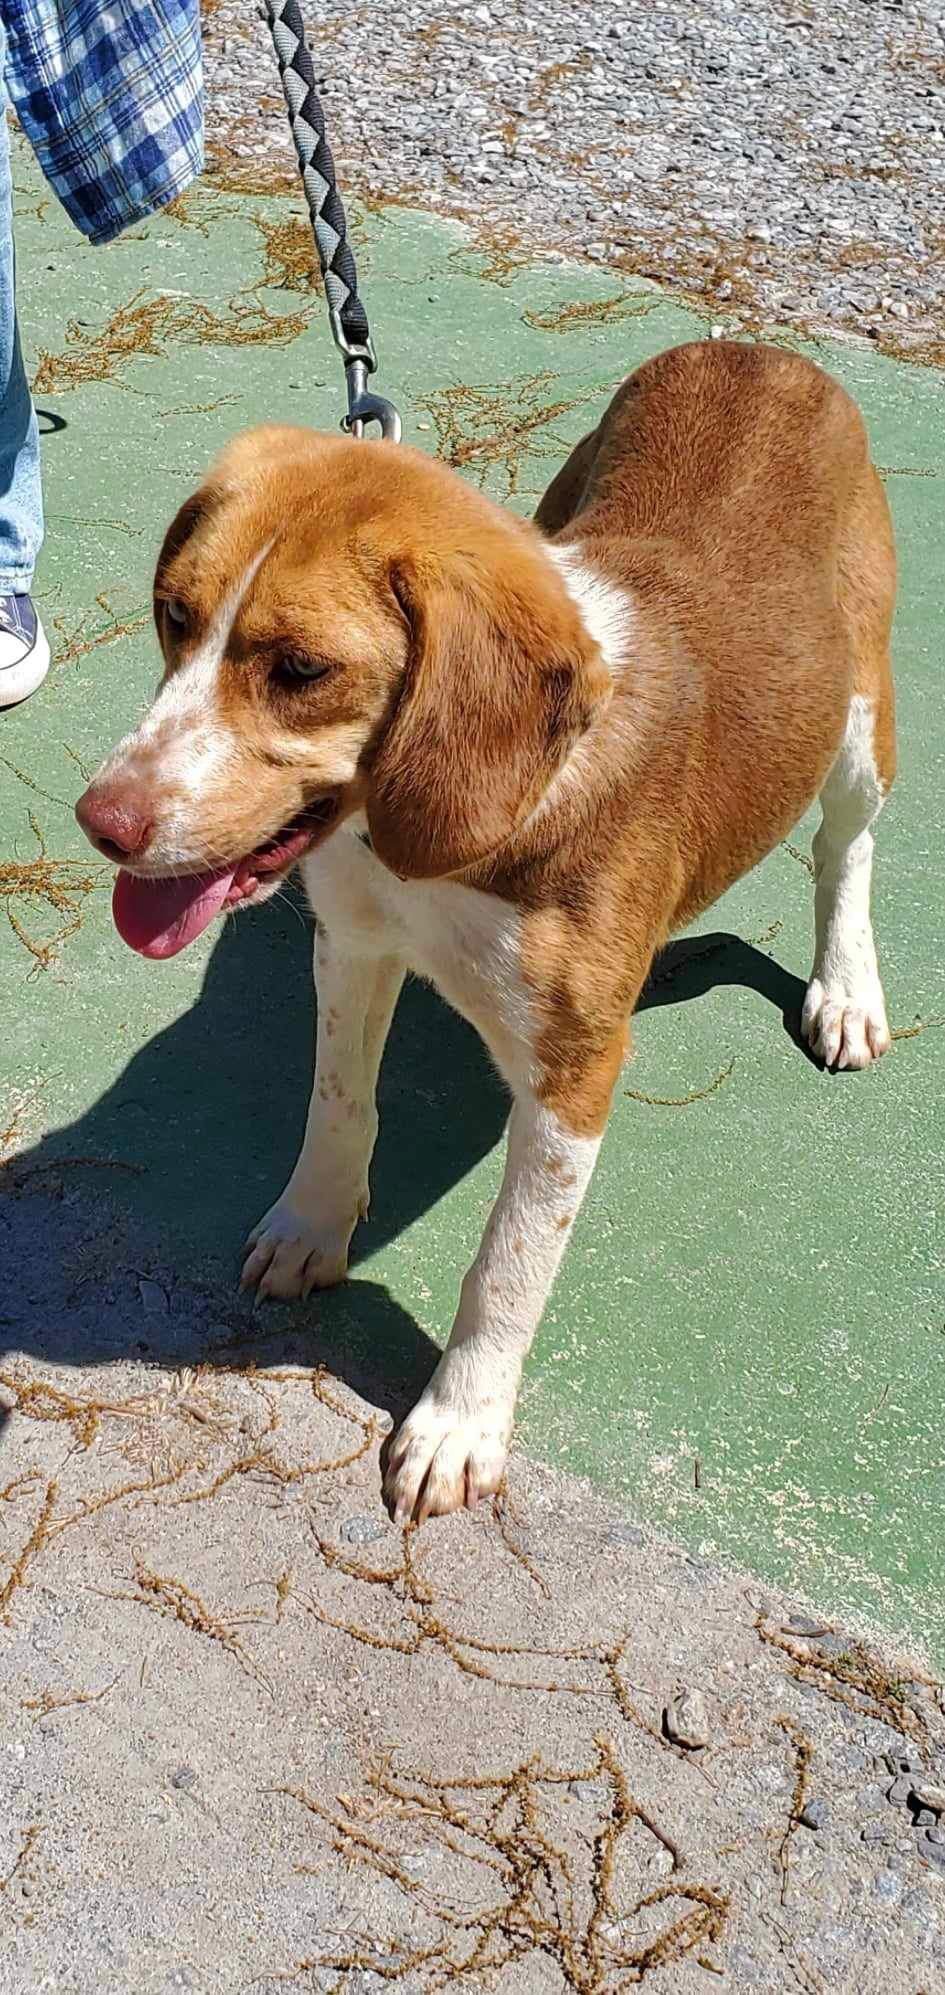 Sunny - At shelter available 4/27